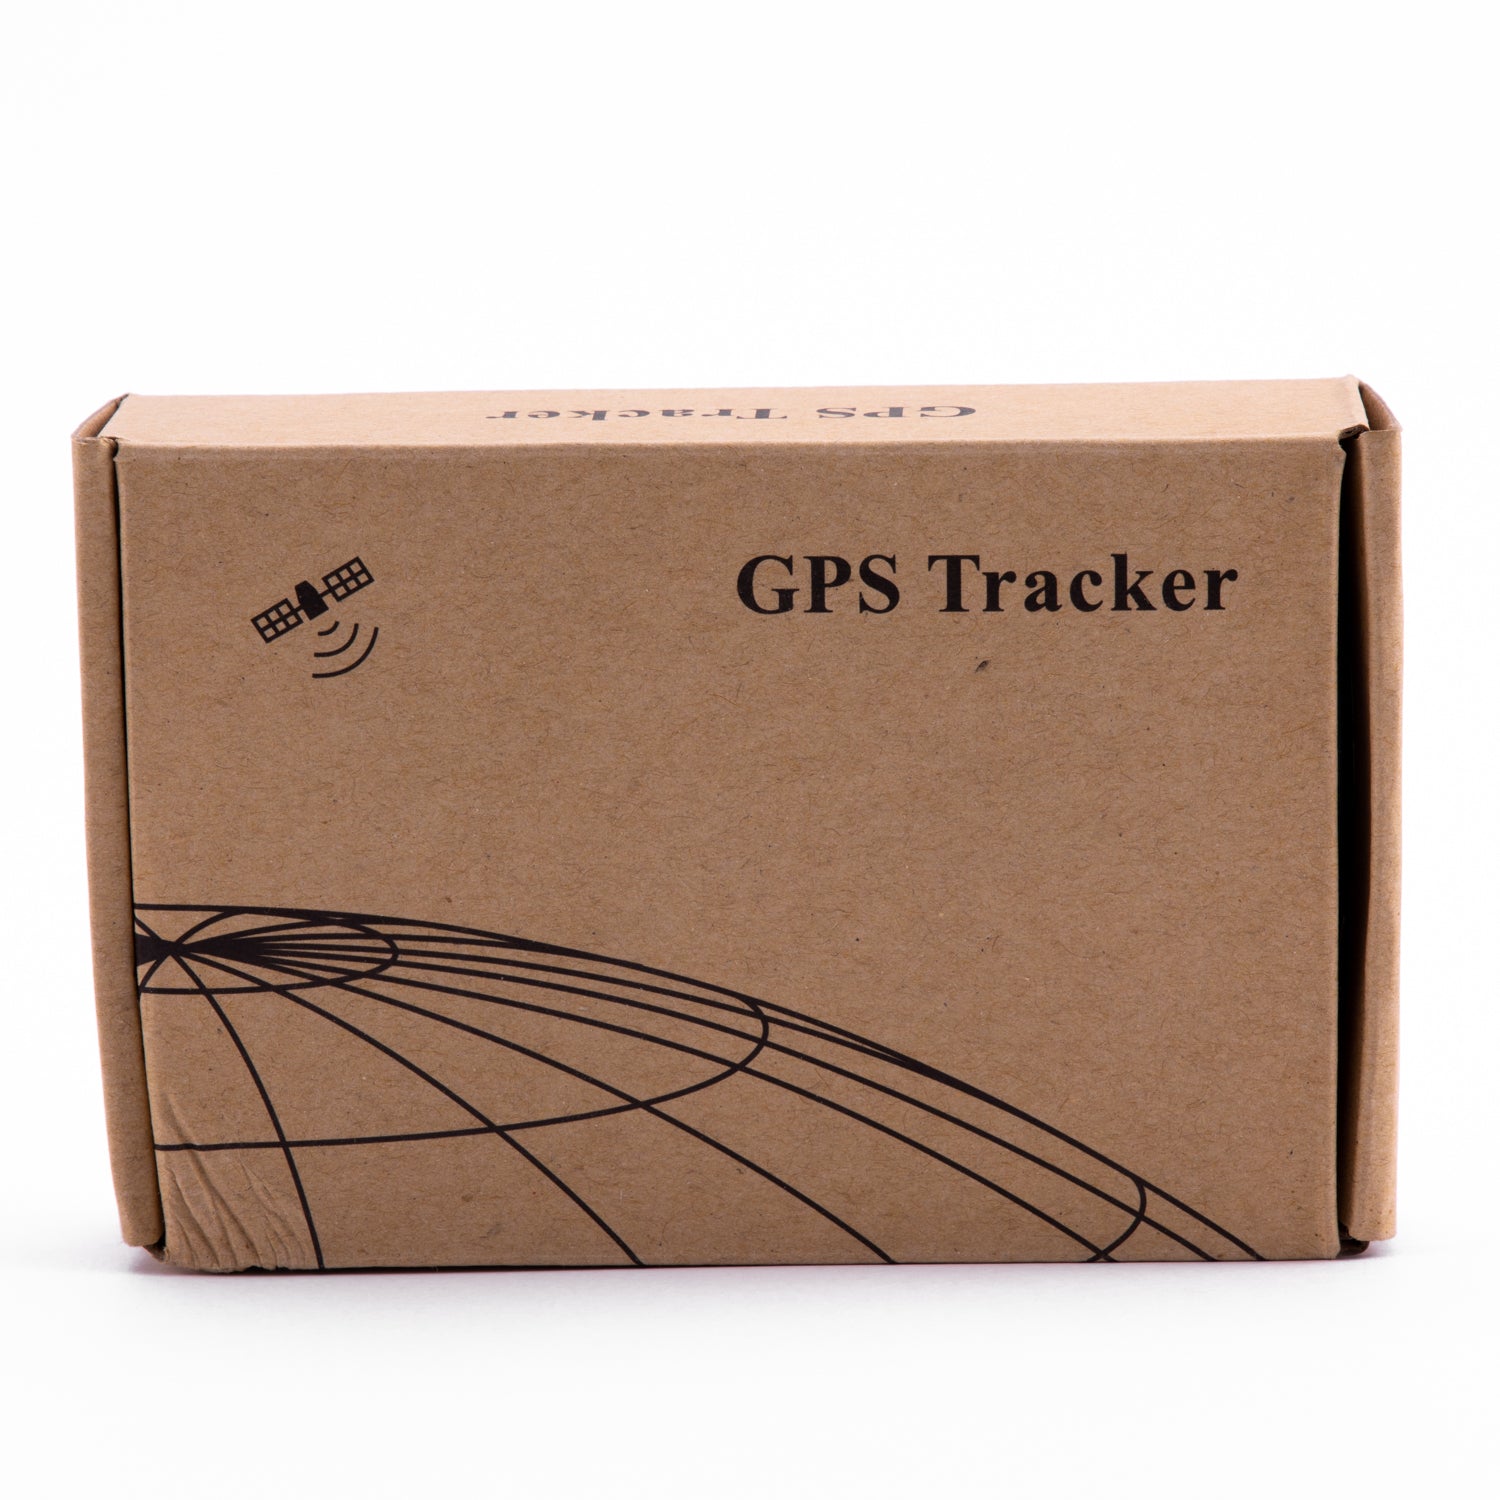 lbc tracking package tracking number